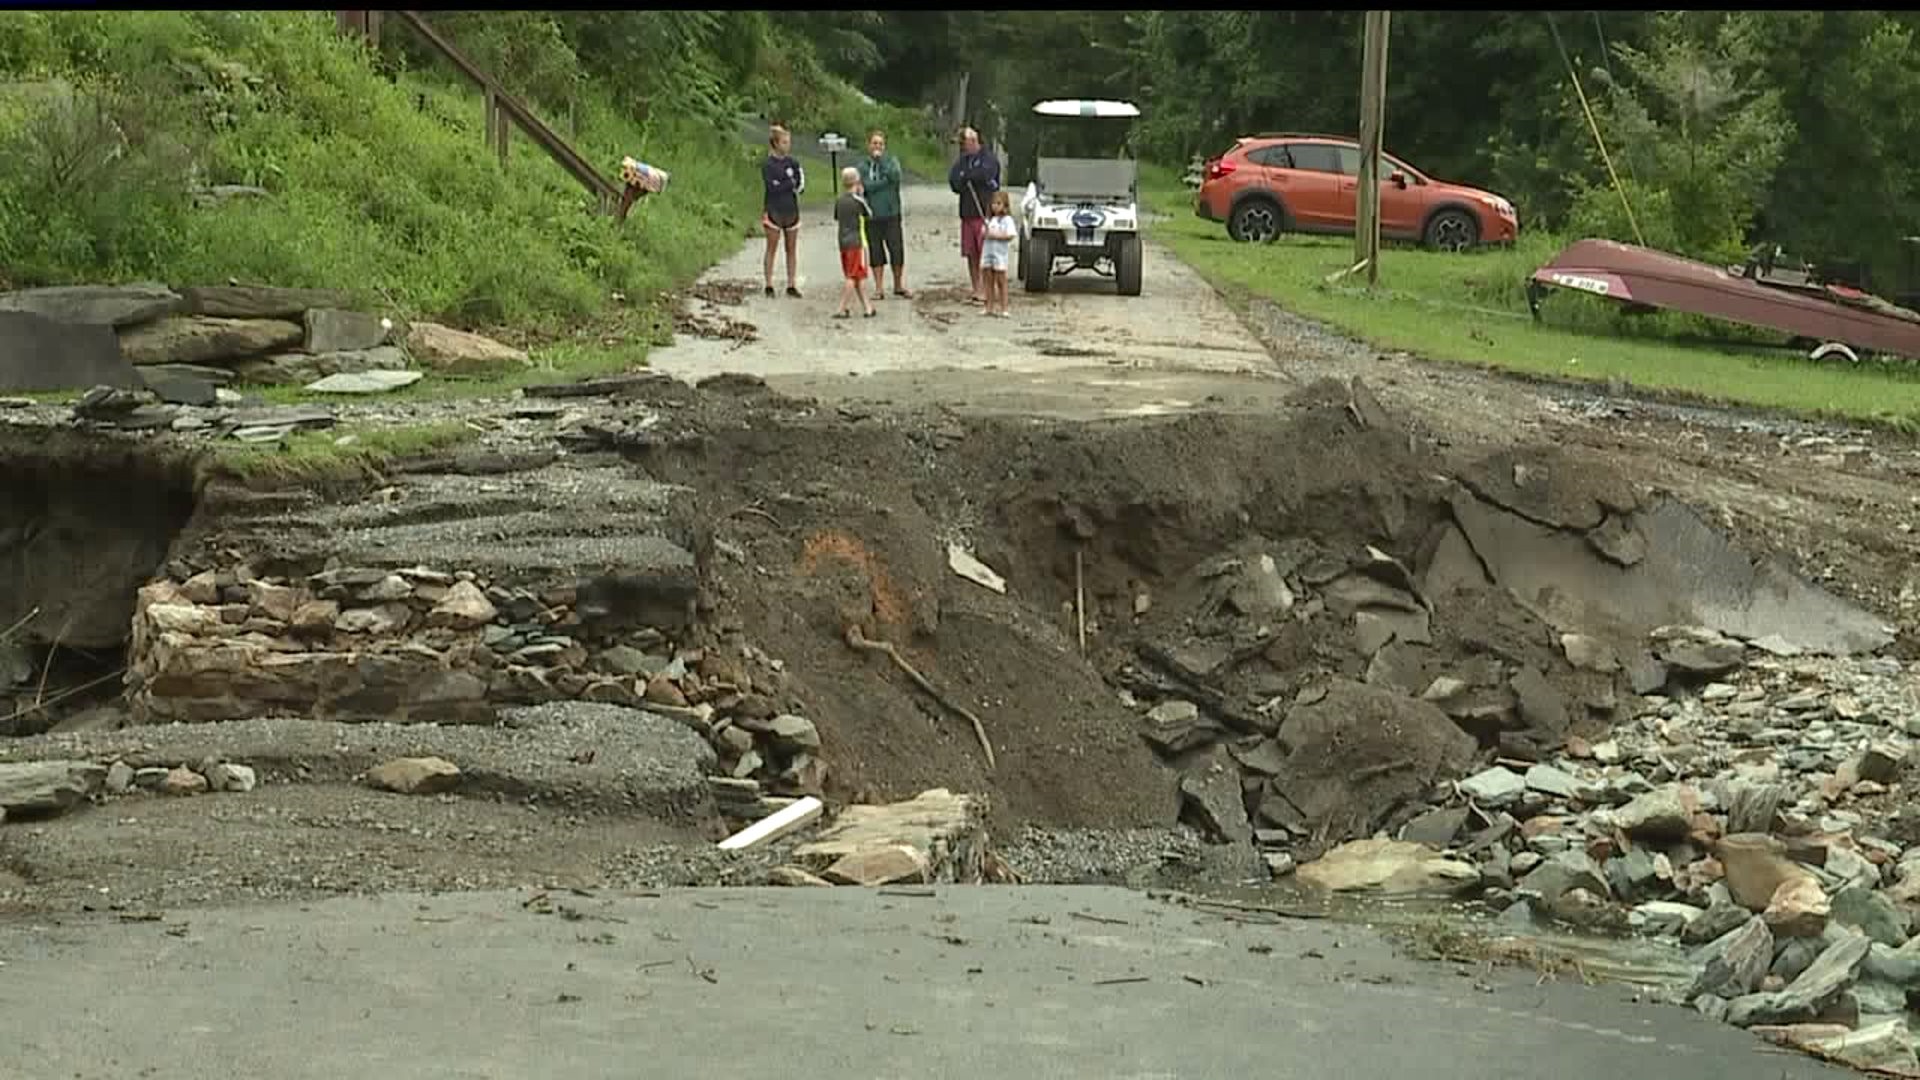 PROPOSED LEGISLATION TO HELP PA DISASTER VICTIMS